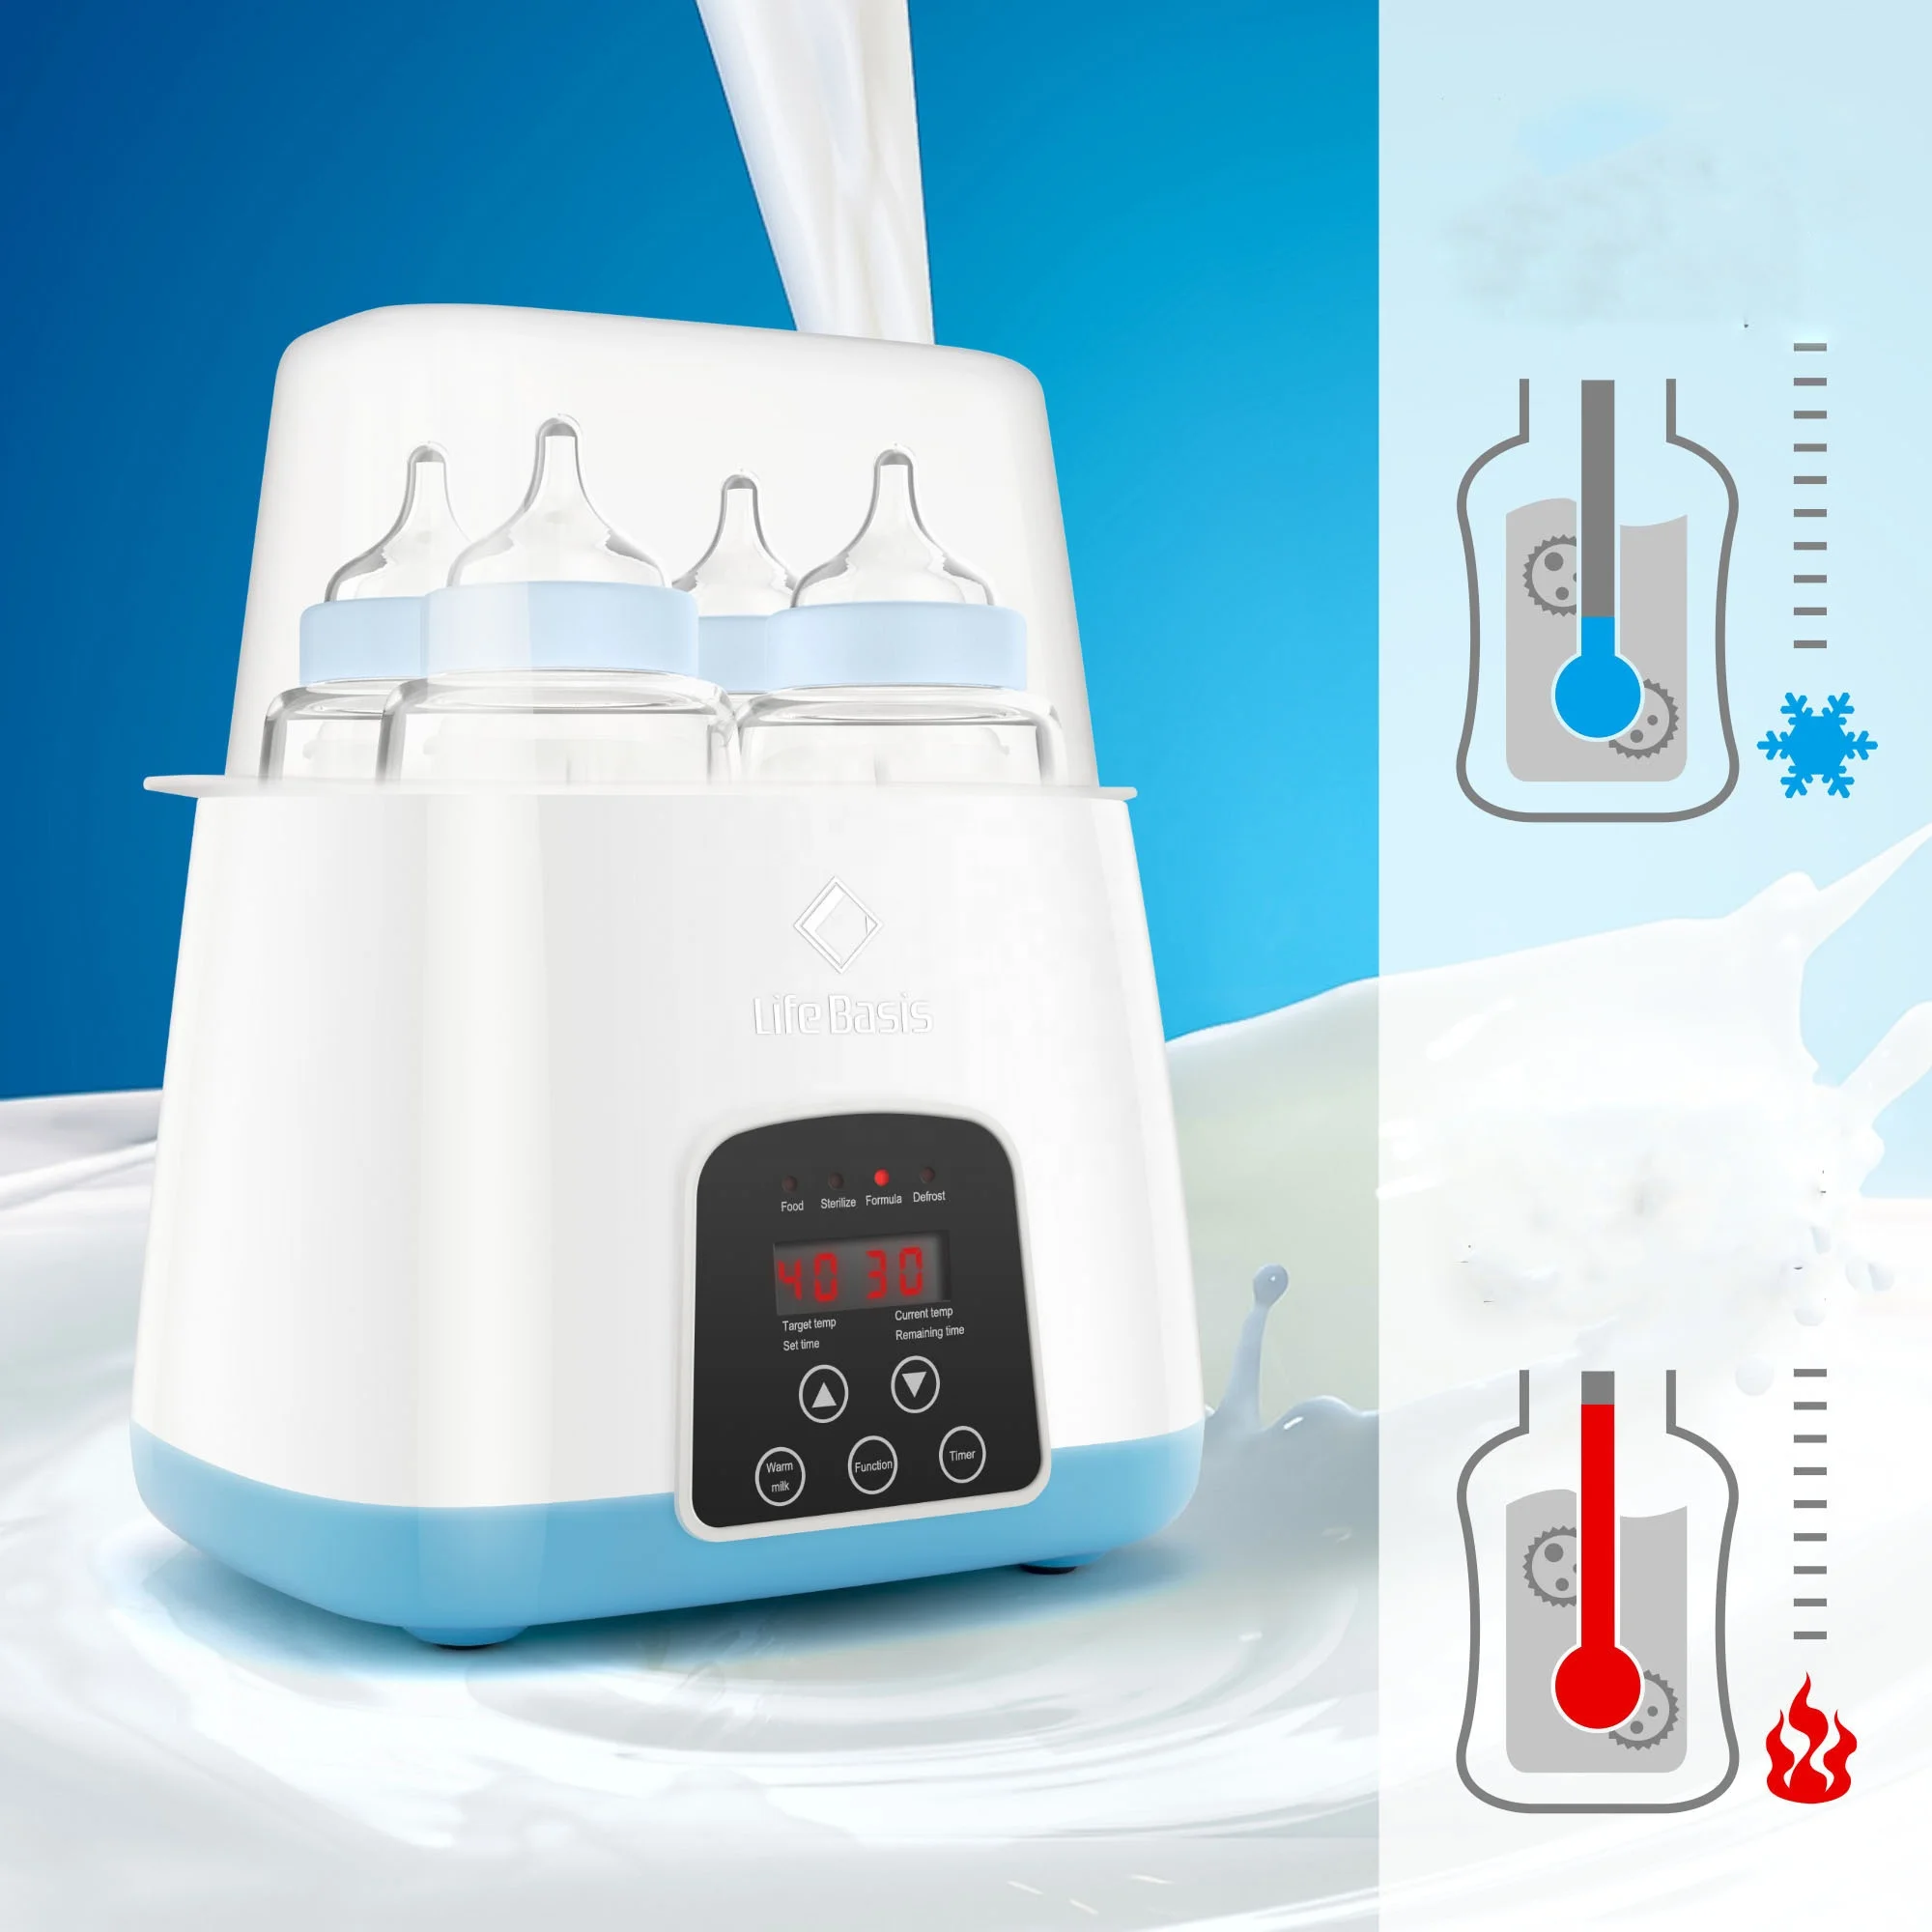 Automatic food fast heating electric portable baby feeding bottle warmer